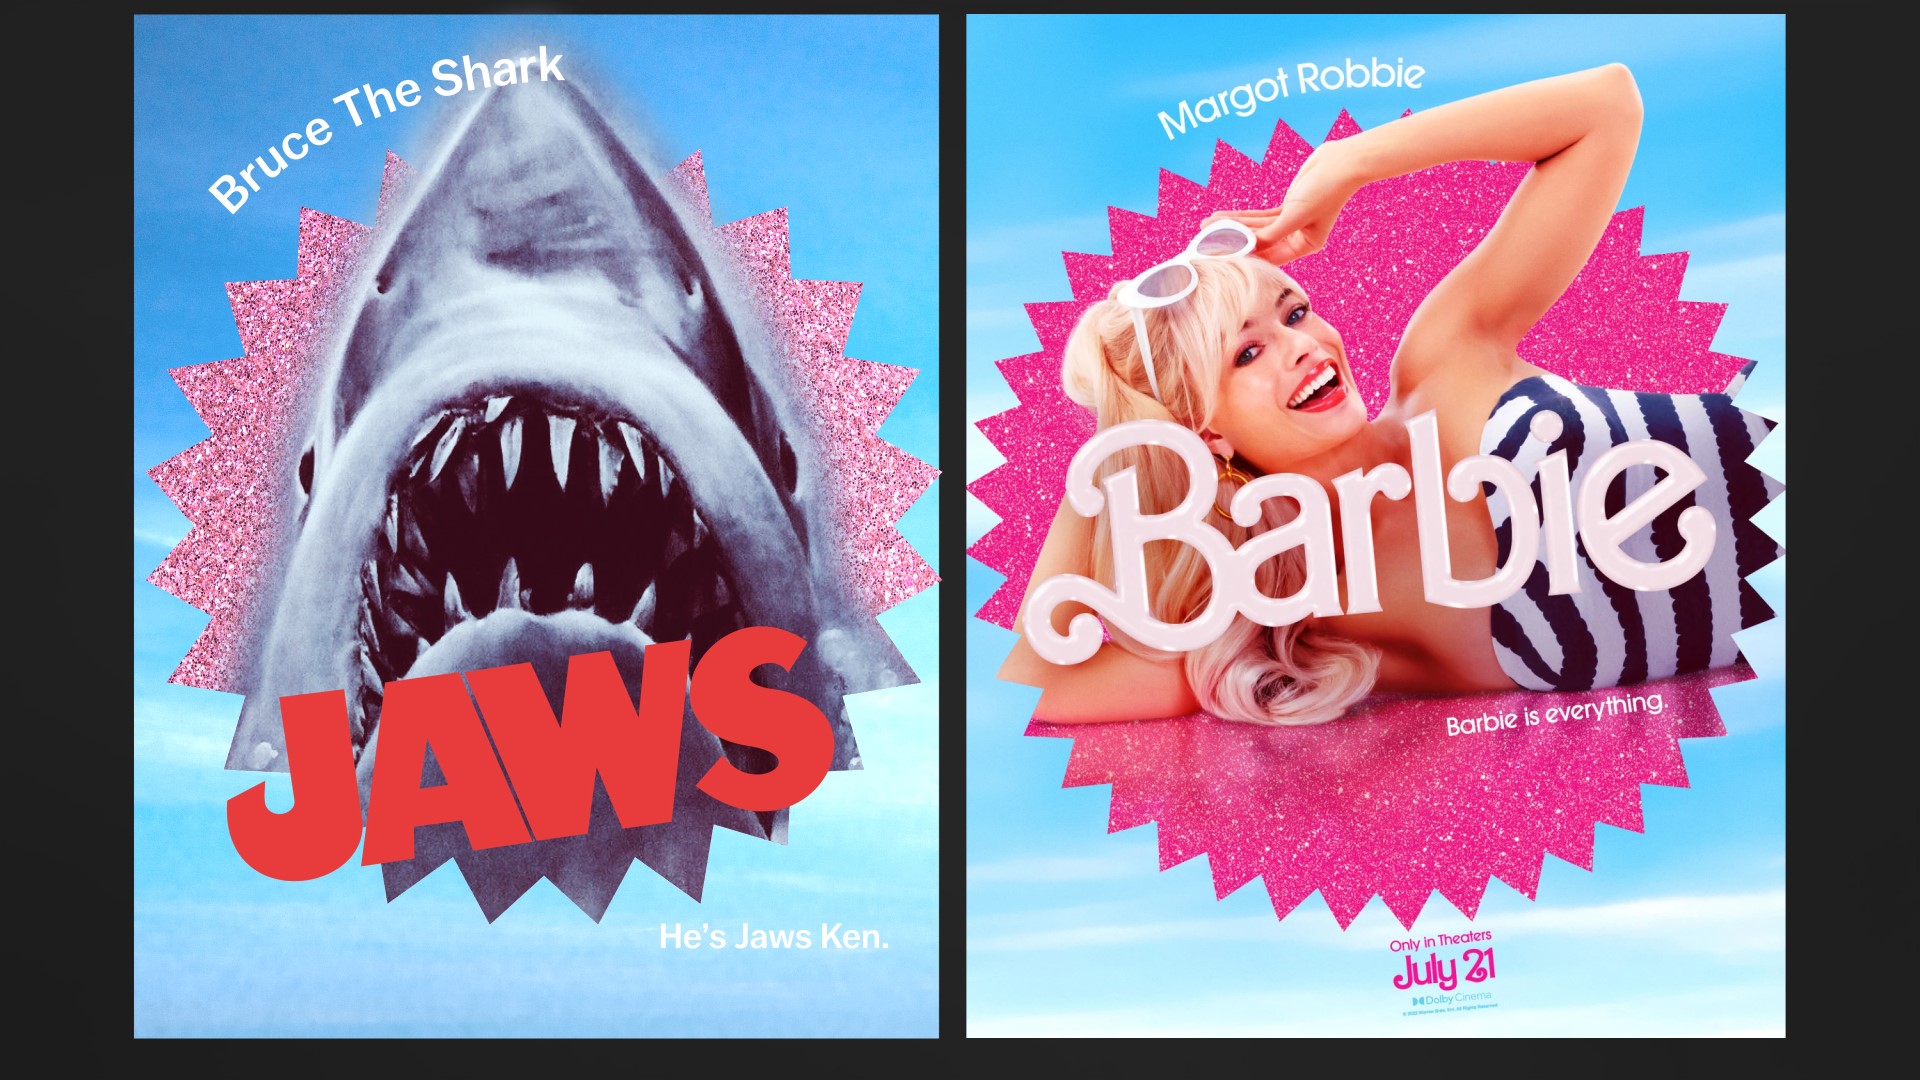 Side by side movie posters of Jaws (right) and Barbie (left). The Barbie poster features a photo of Margot Robbie dressed as a barbie in a retro blue and white striped swimsuit. The Jaws poster is stylized to match the Barbie poster, with a sparkly pink and blue backdrop and the words “Bruce The Shark” lettered across the top. 